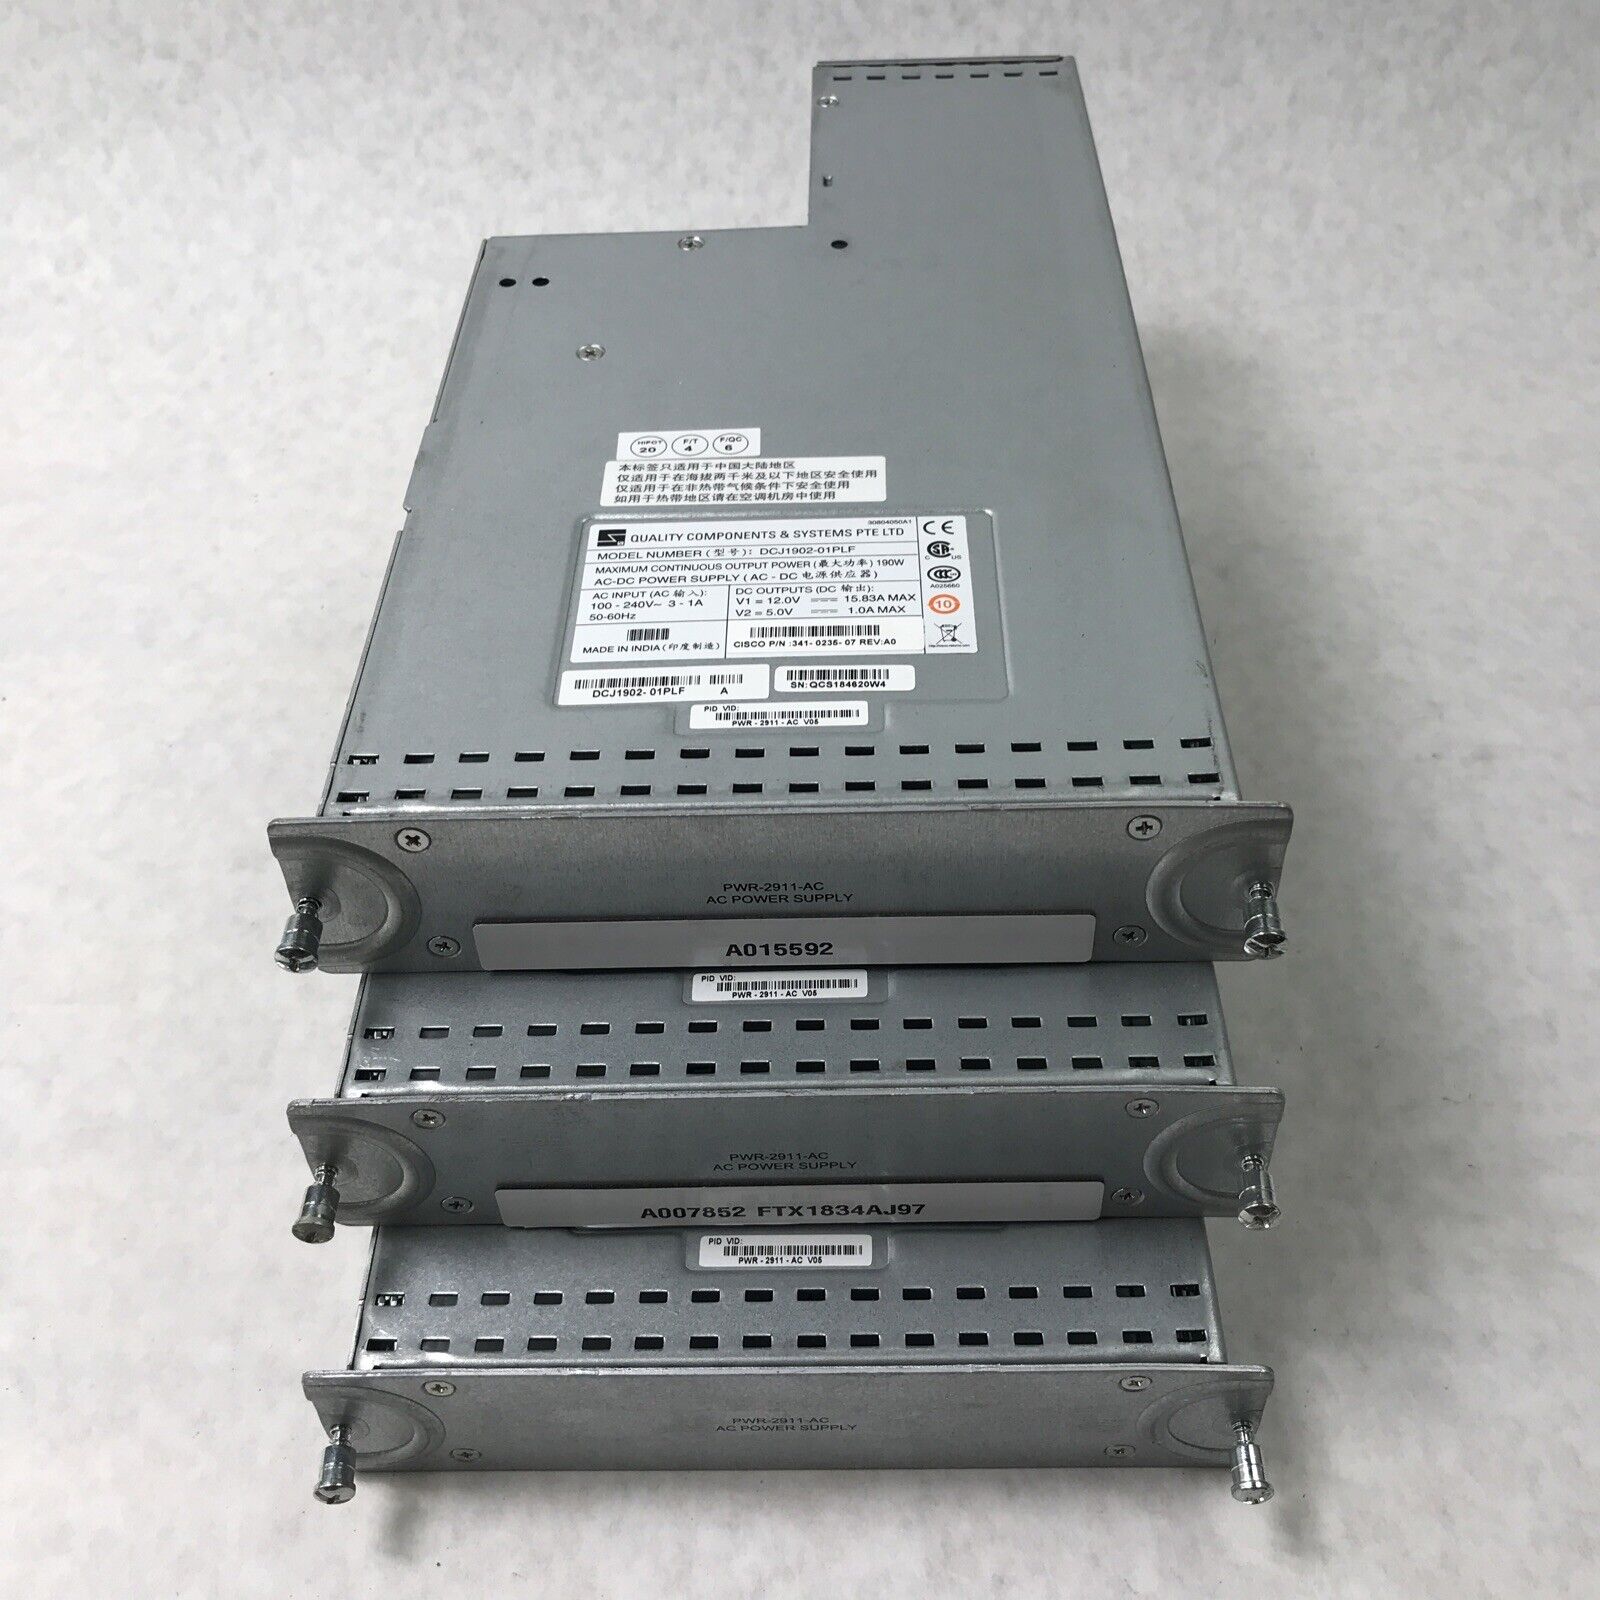 Quality Components DCJ1902-01PLF 190W 240V 60Hz Power Supply (Tested) (Lot of 3)